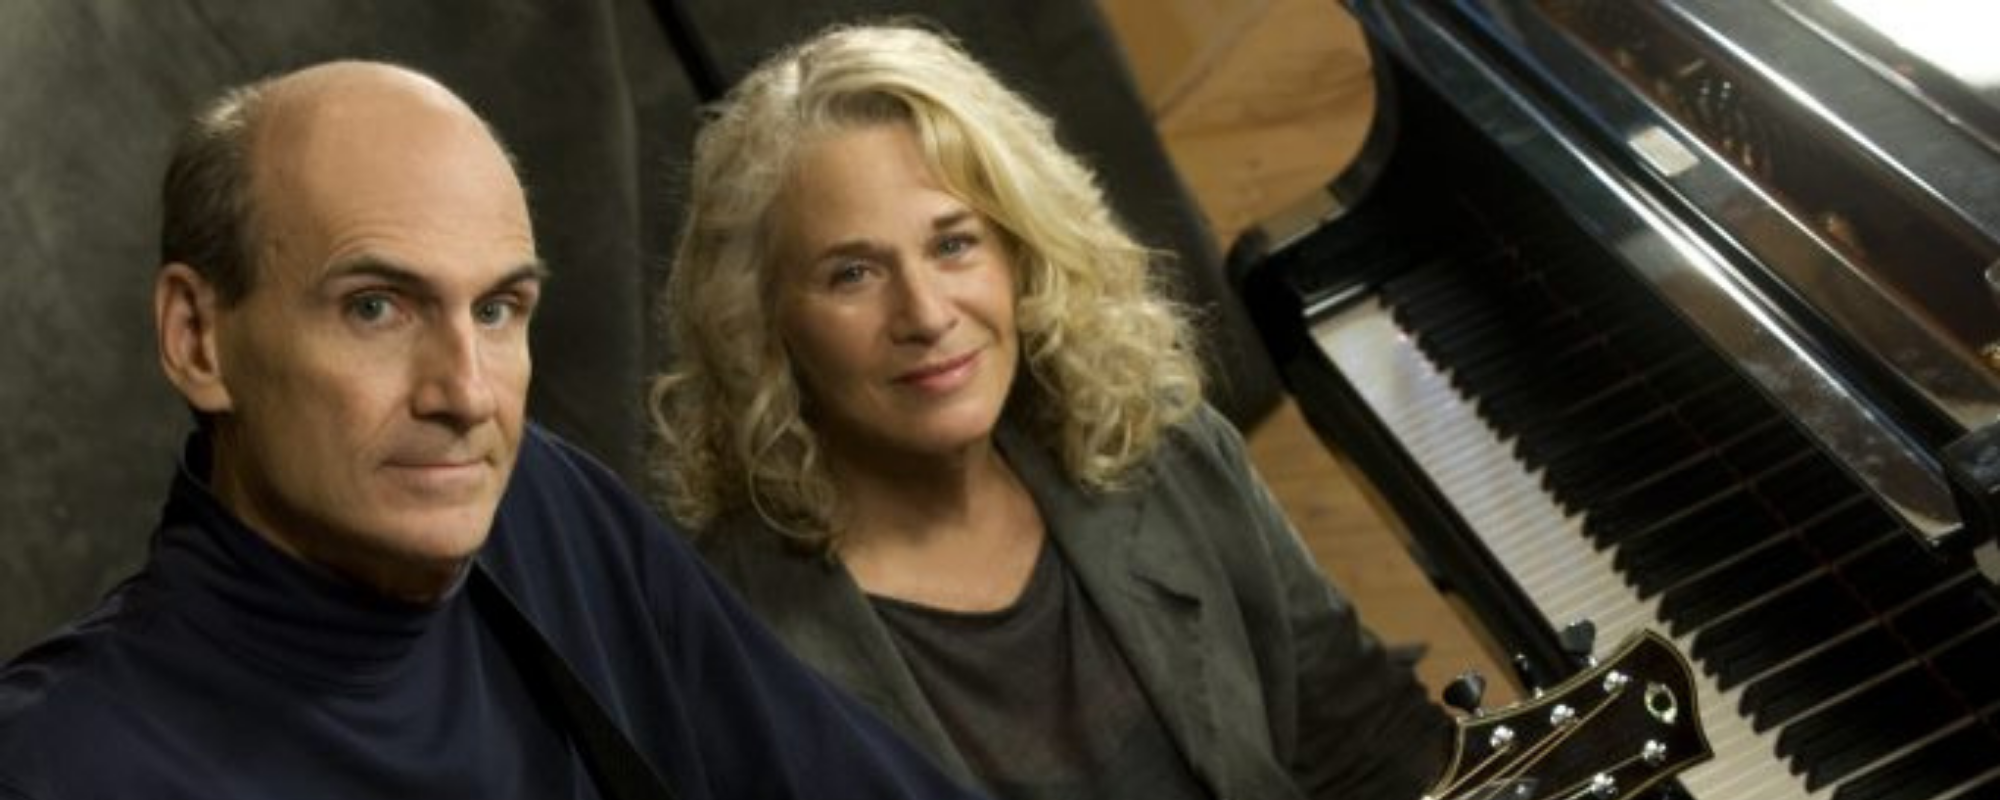 ‘Carole King & James Taylor: Just Call Out My Name’  Documentary in the Works